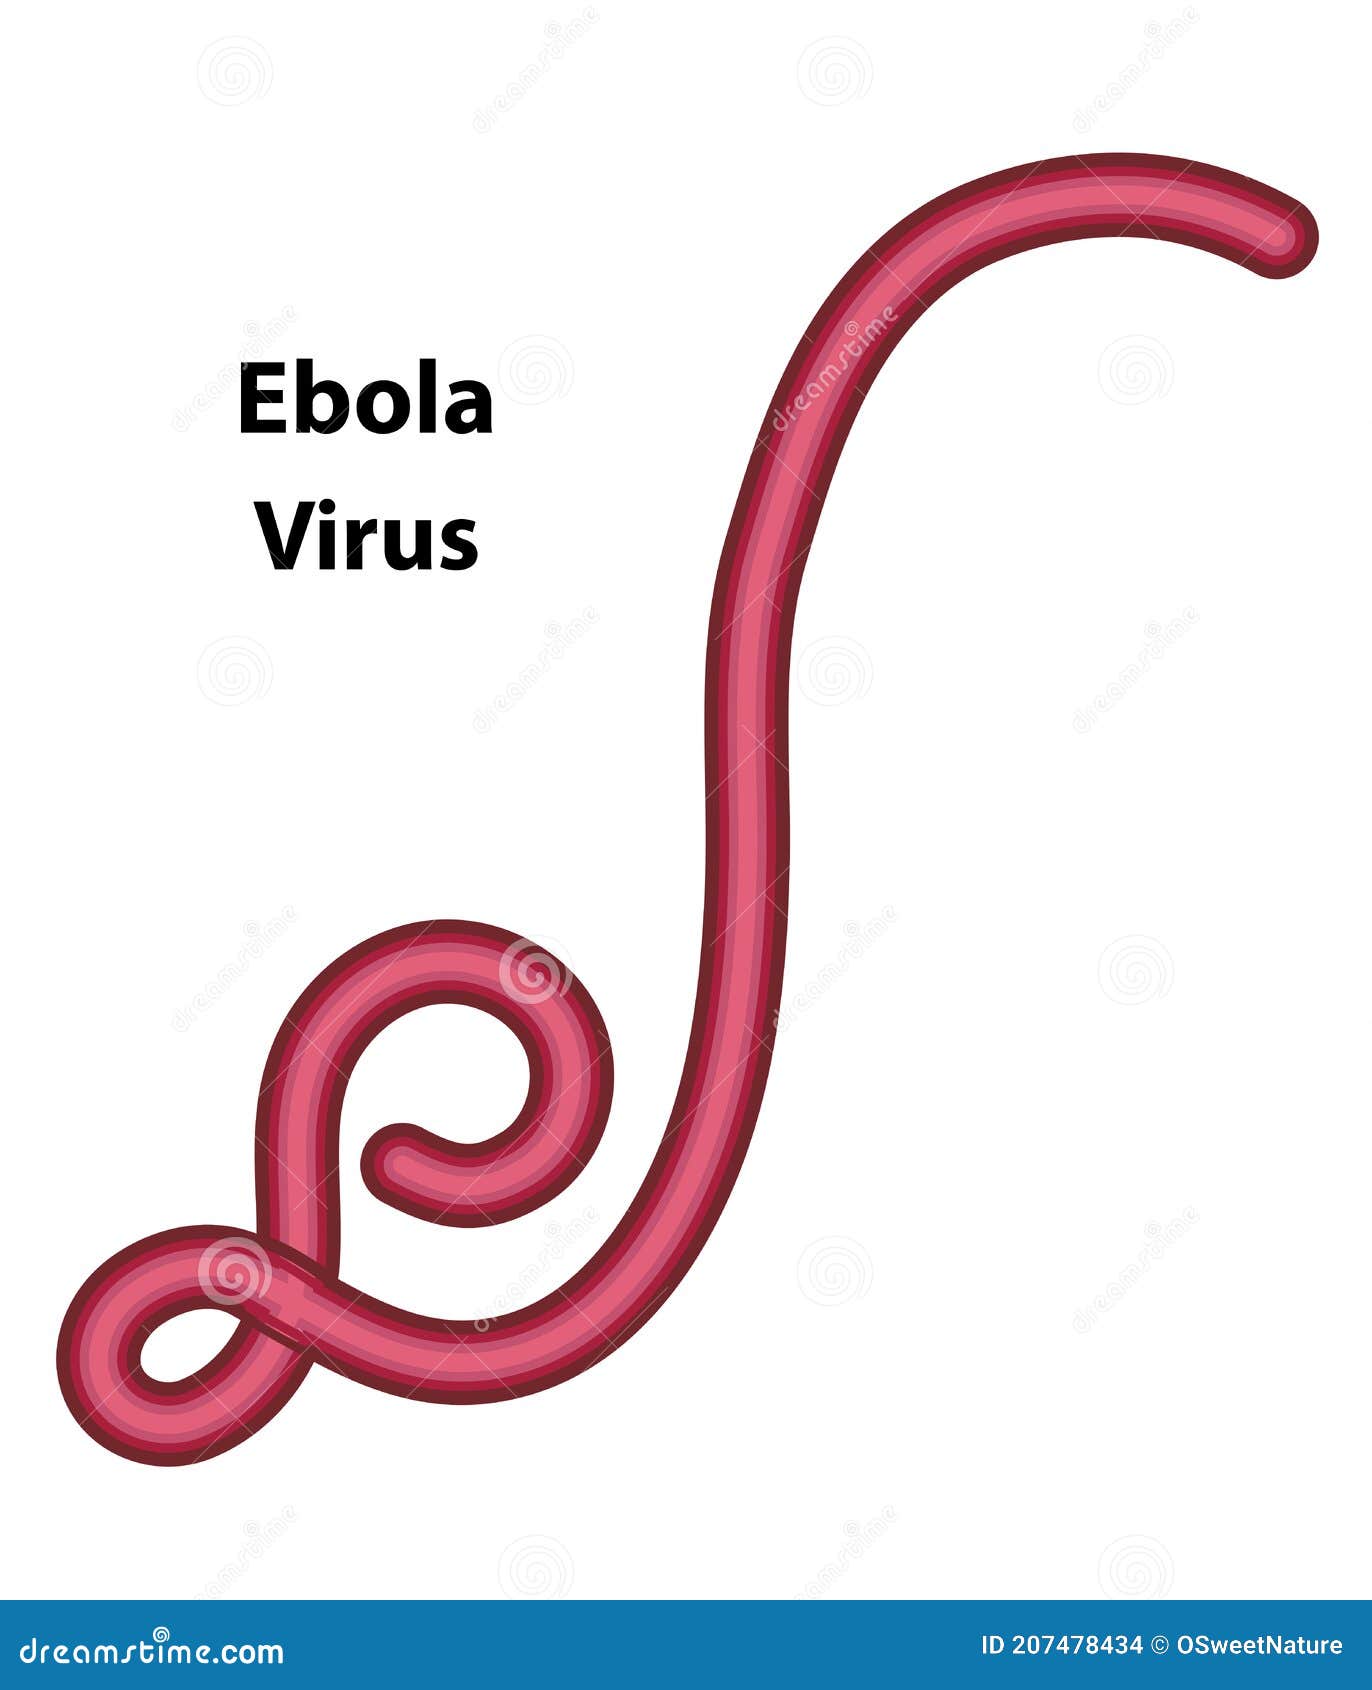 Ebola Virus As An Example Stock Vector Illustration Of Features 207478434